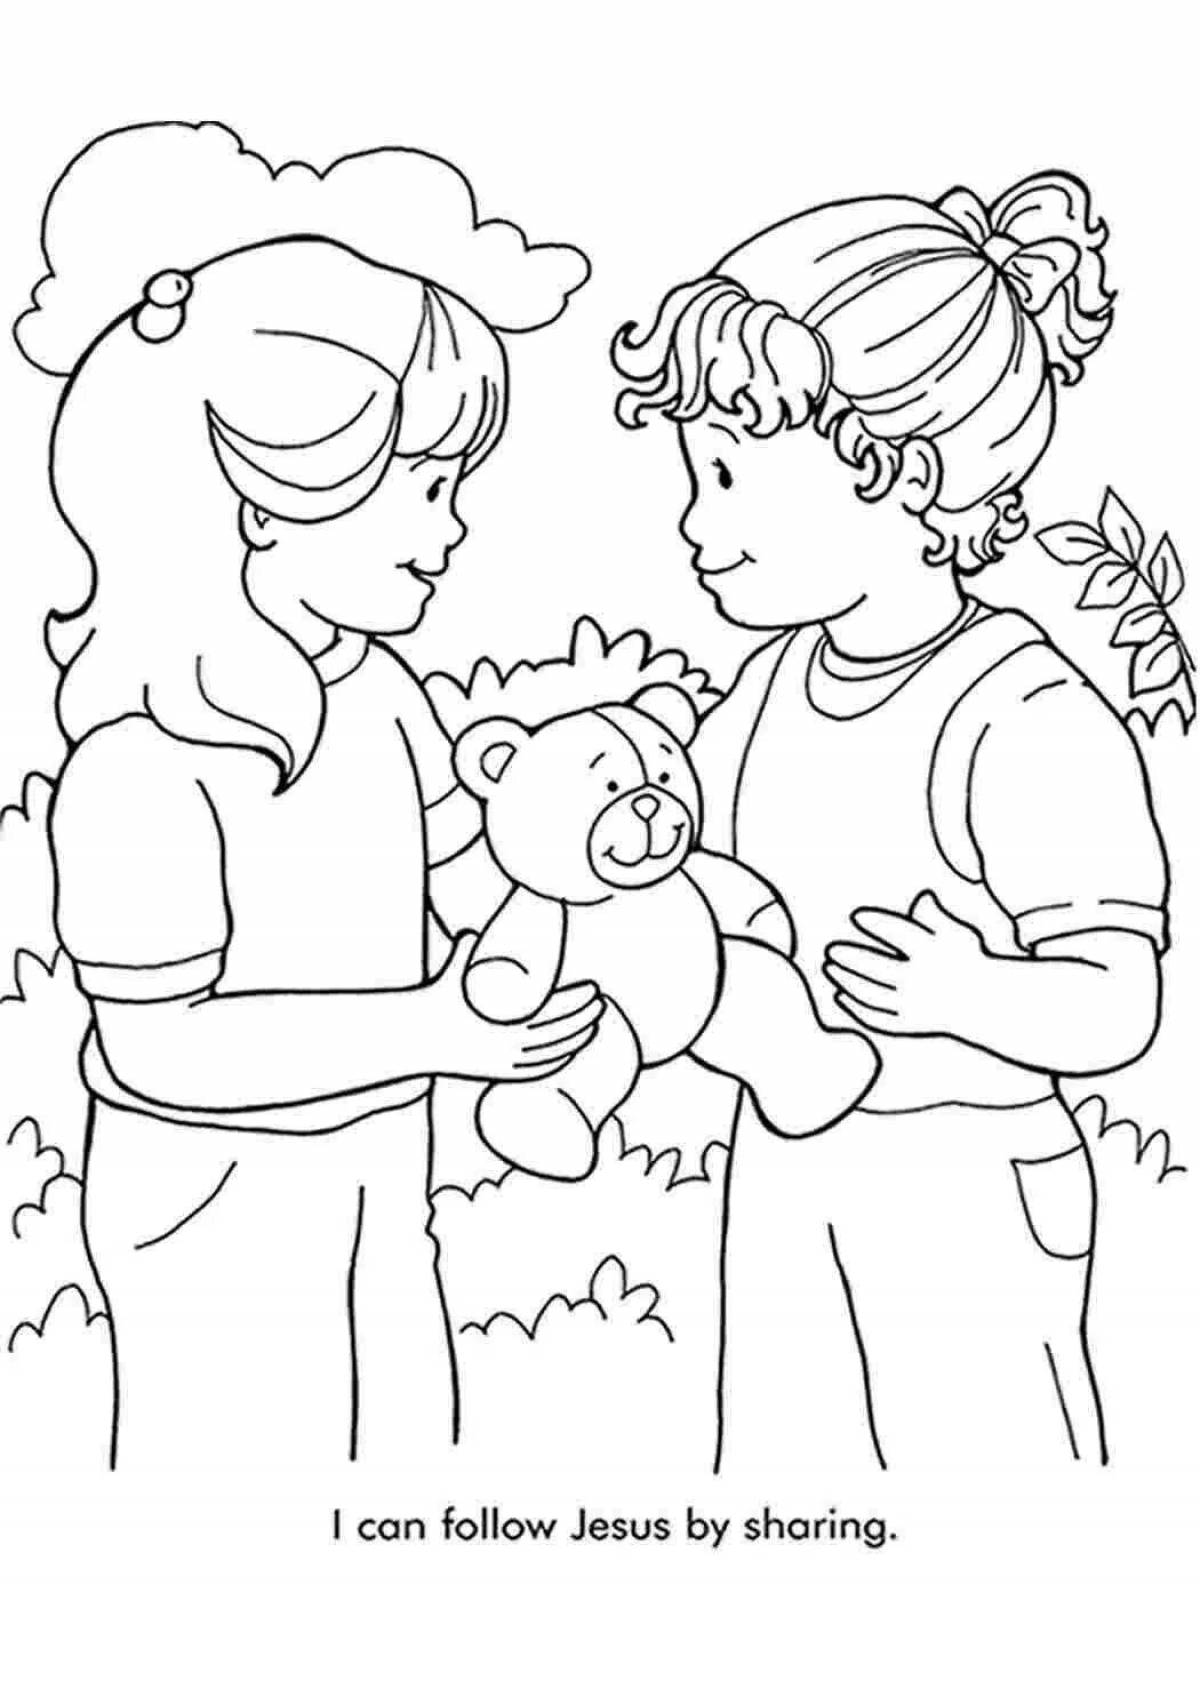 Caring kindness coloring page